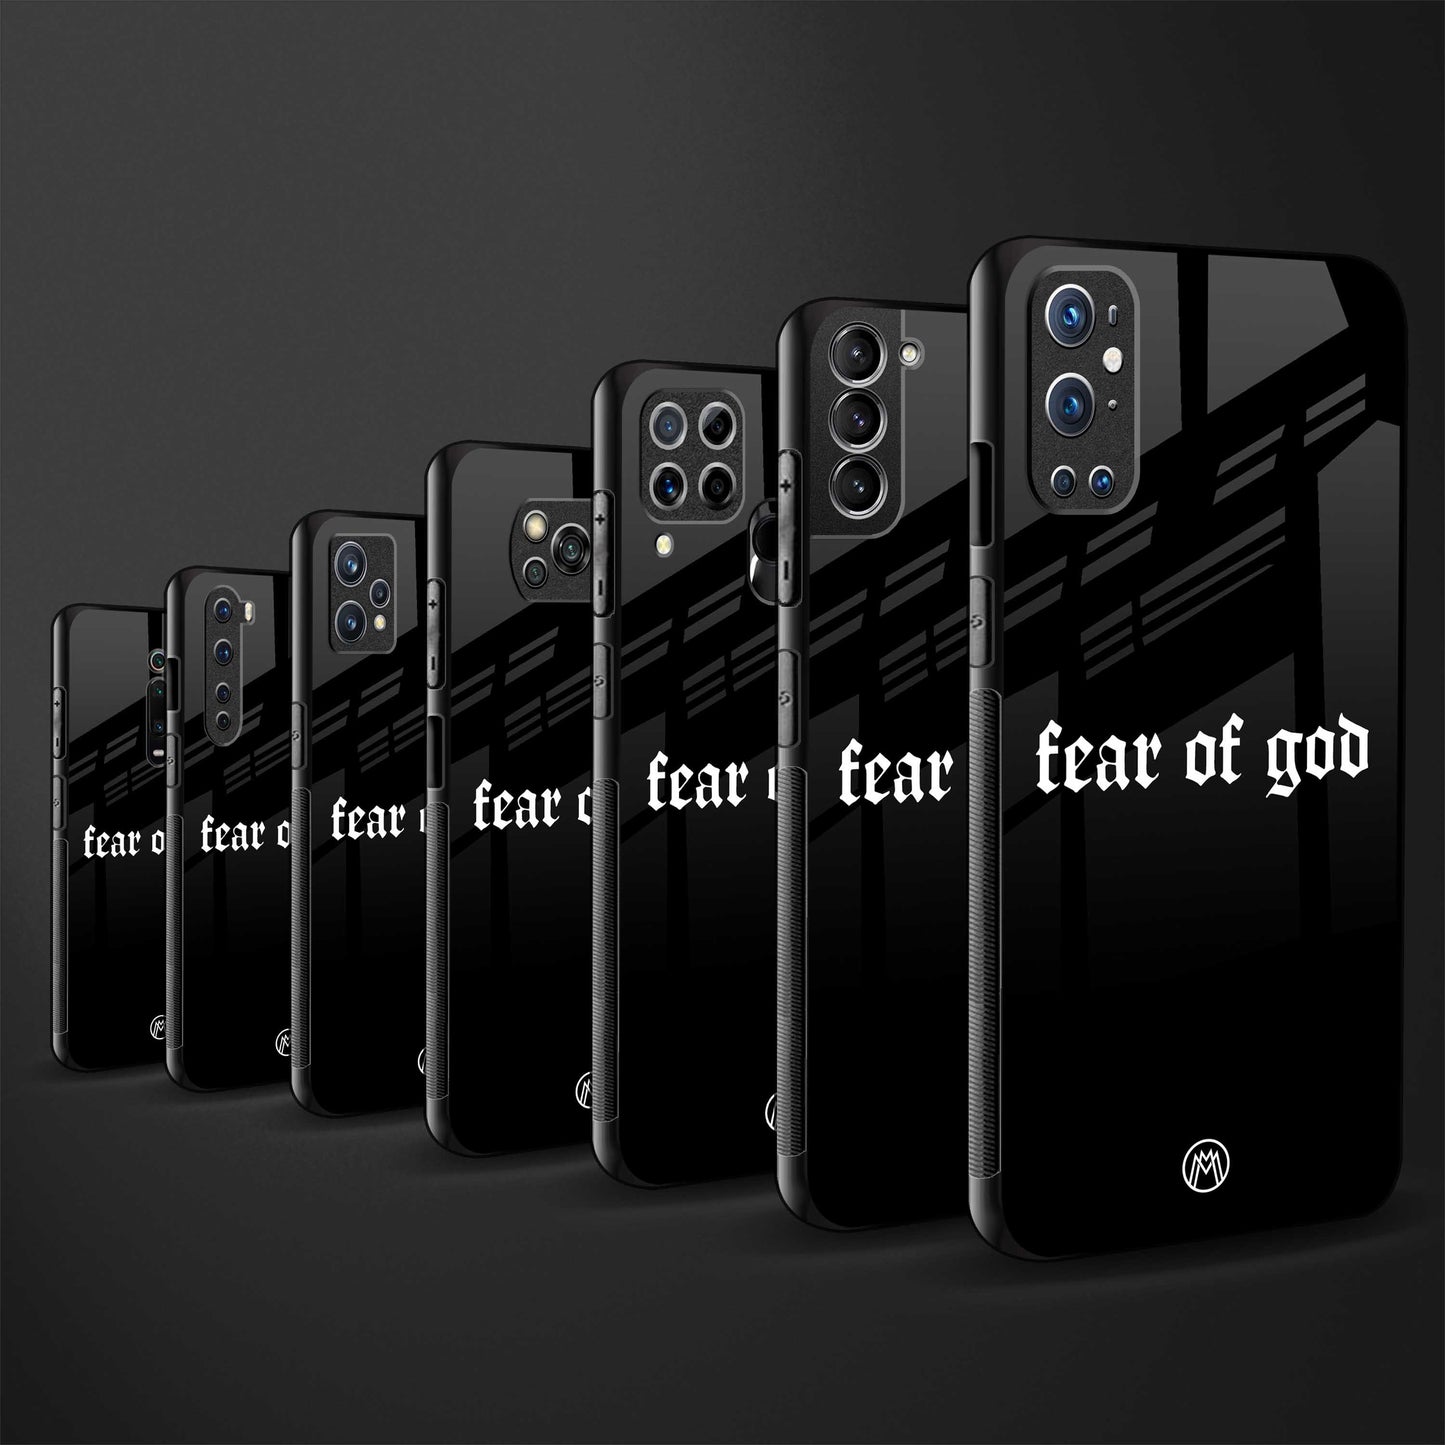 fear of god phone cover for samsung galaxy s20 fe